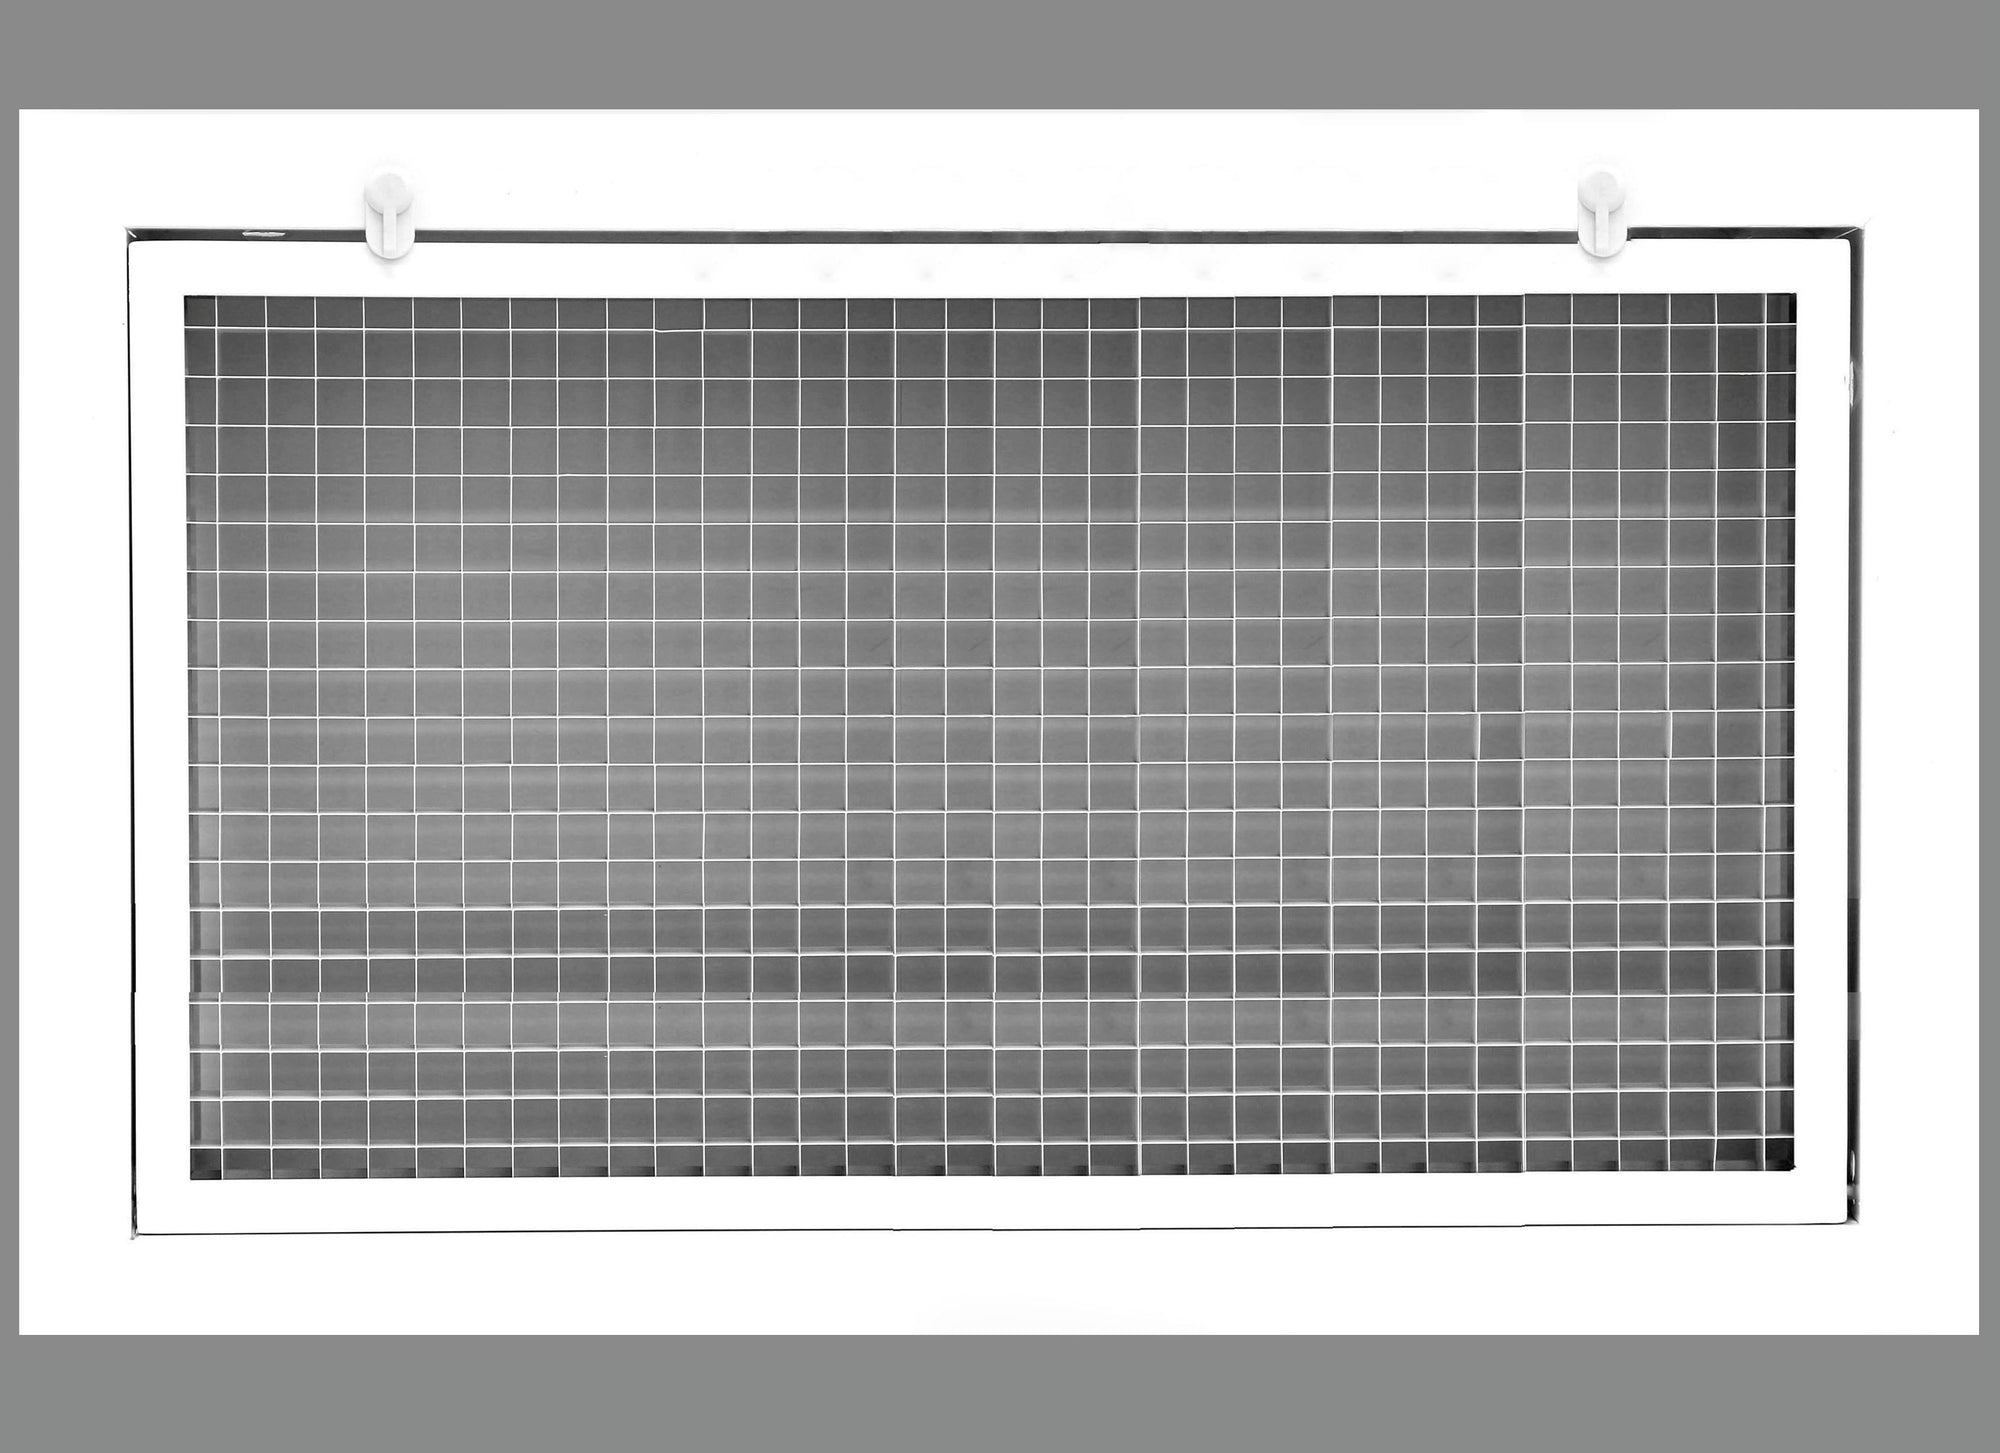 36" x 24" Cube Core Eggcrate Return Air Filter Grille for 1" Filter